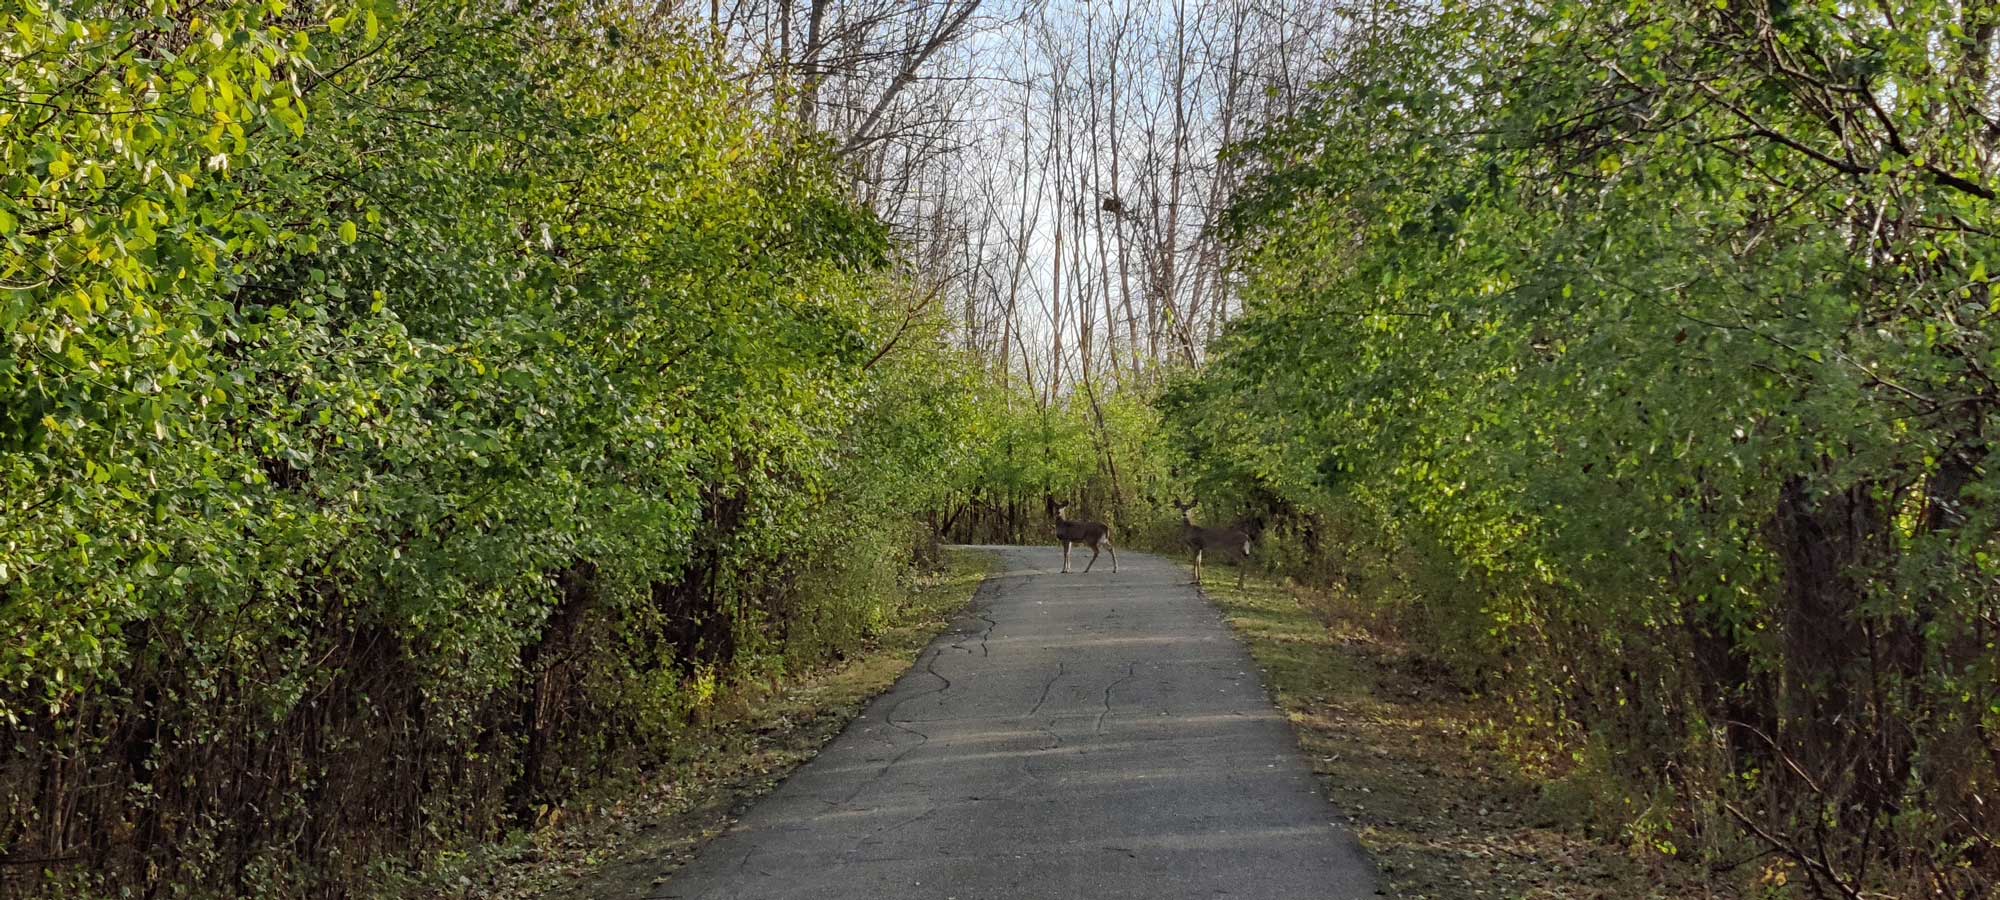 Deer on a paved trail